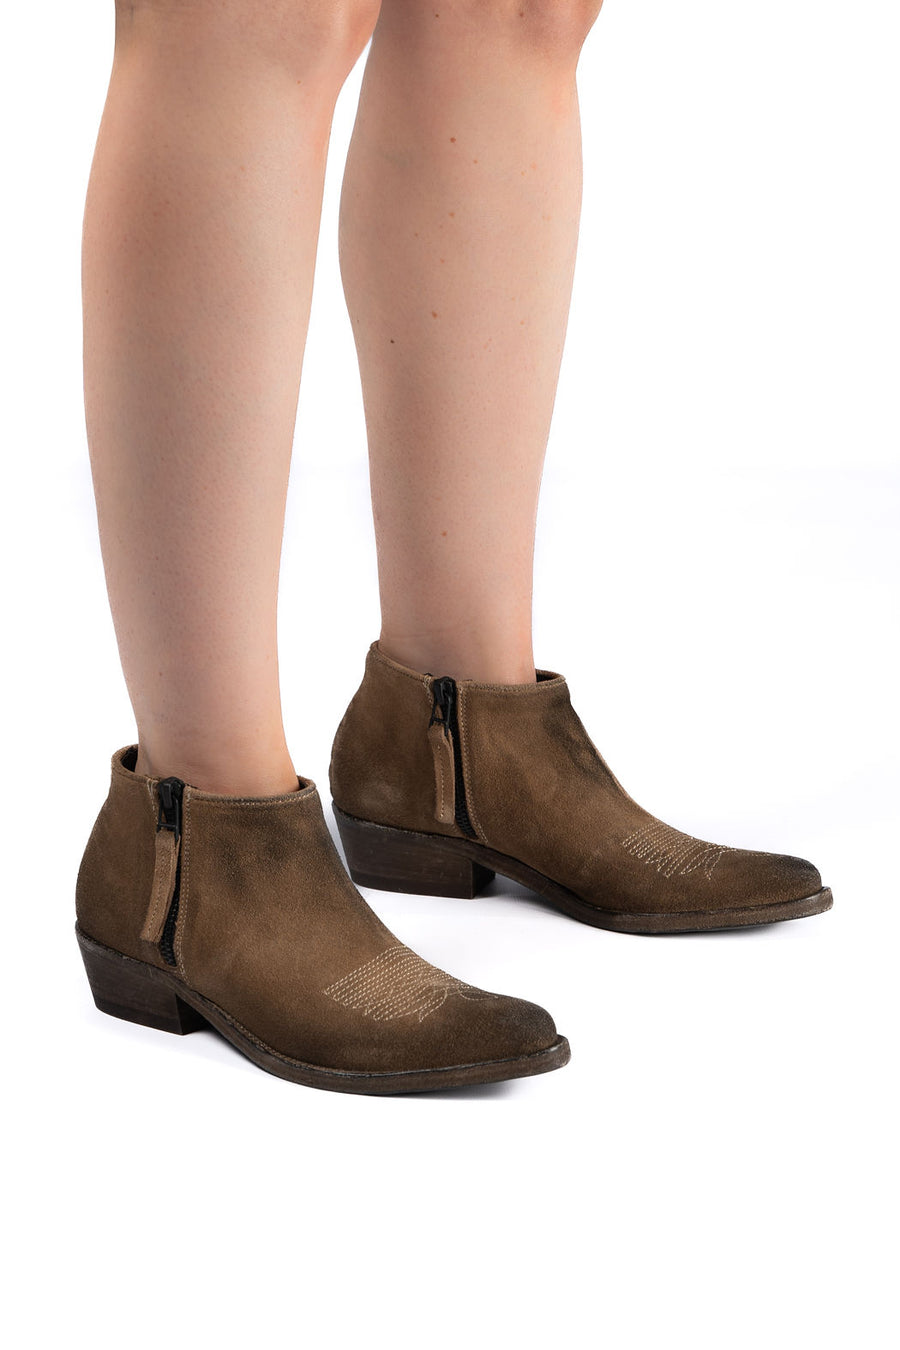 MORGAN Keep Tan Booties with White Stitch